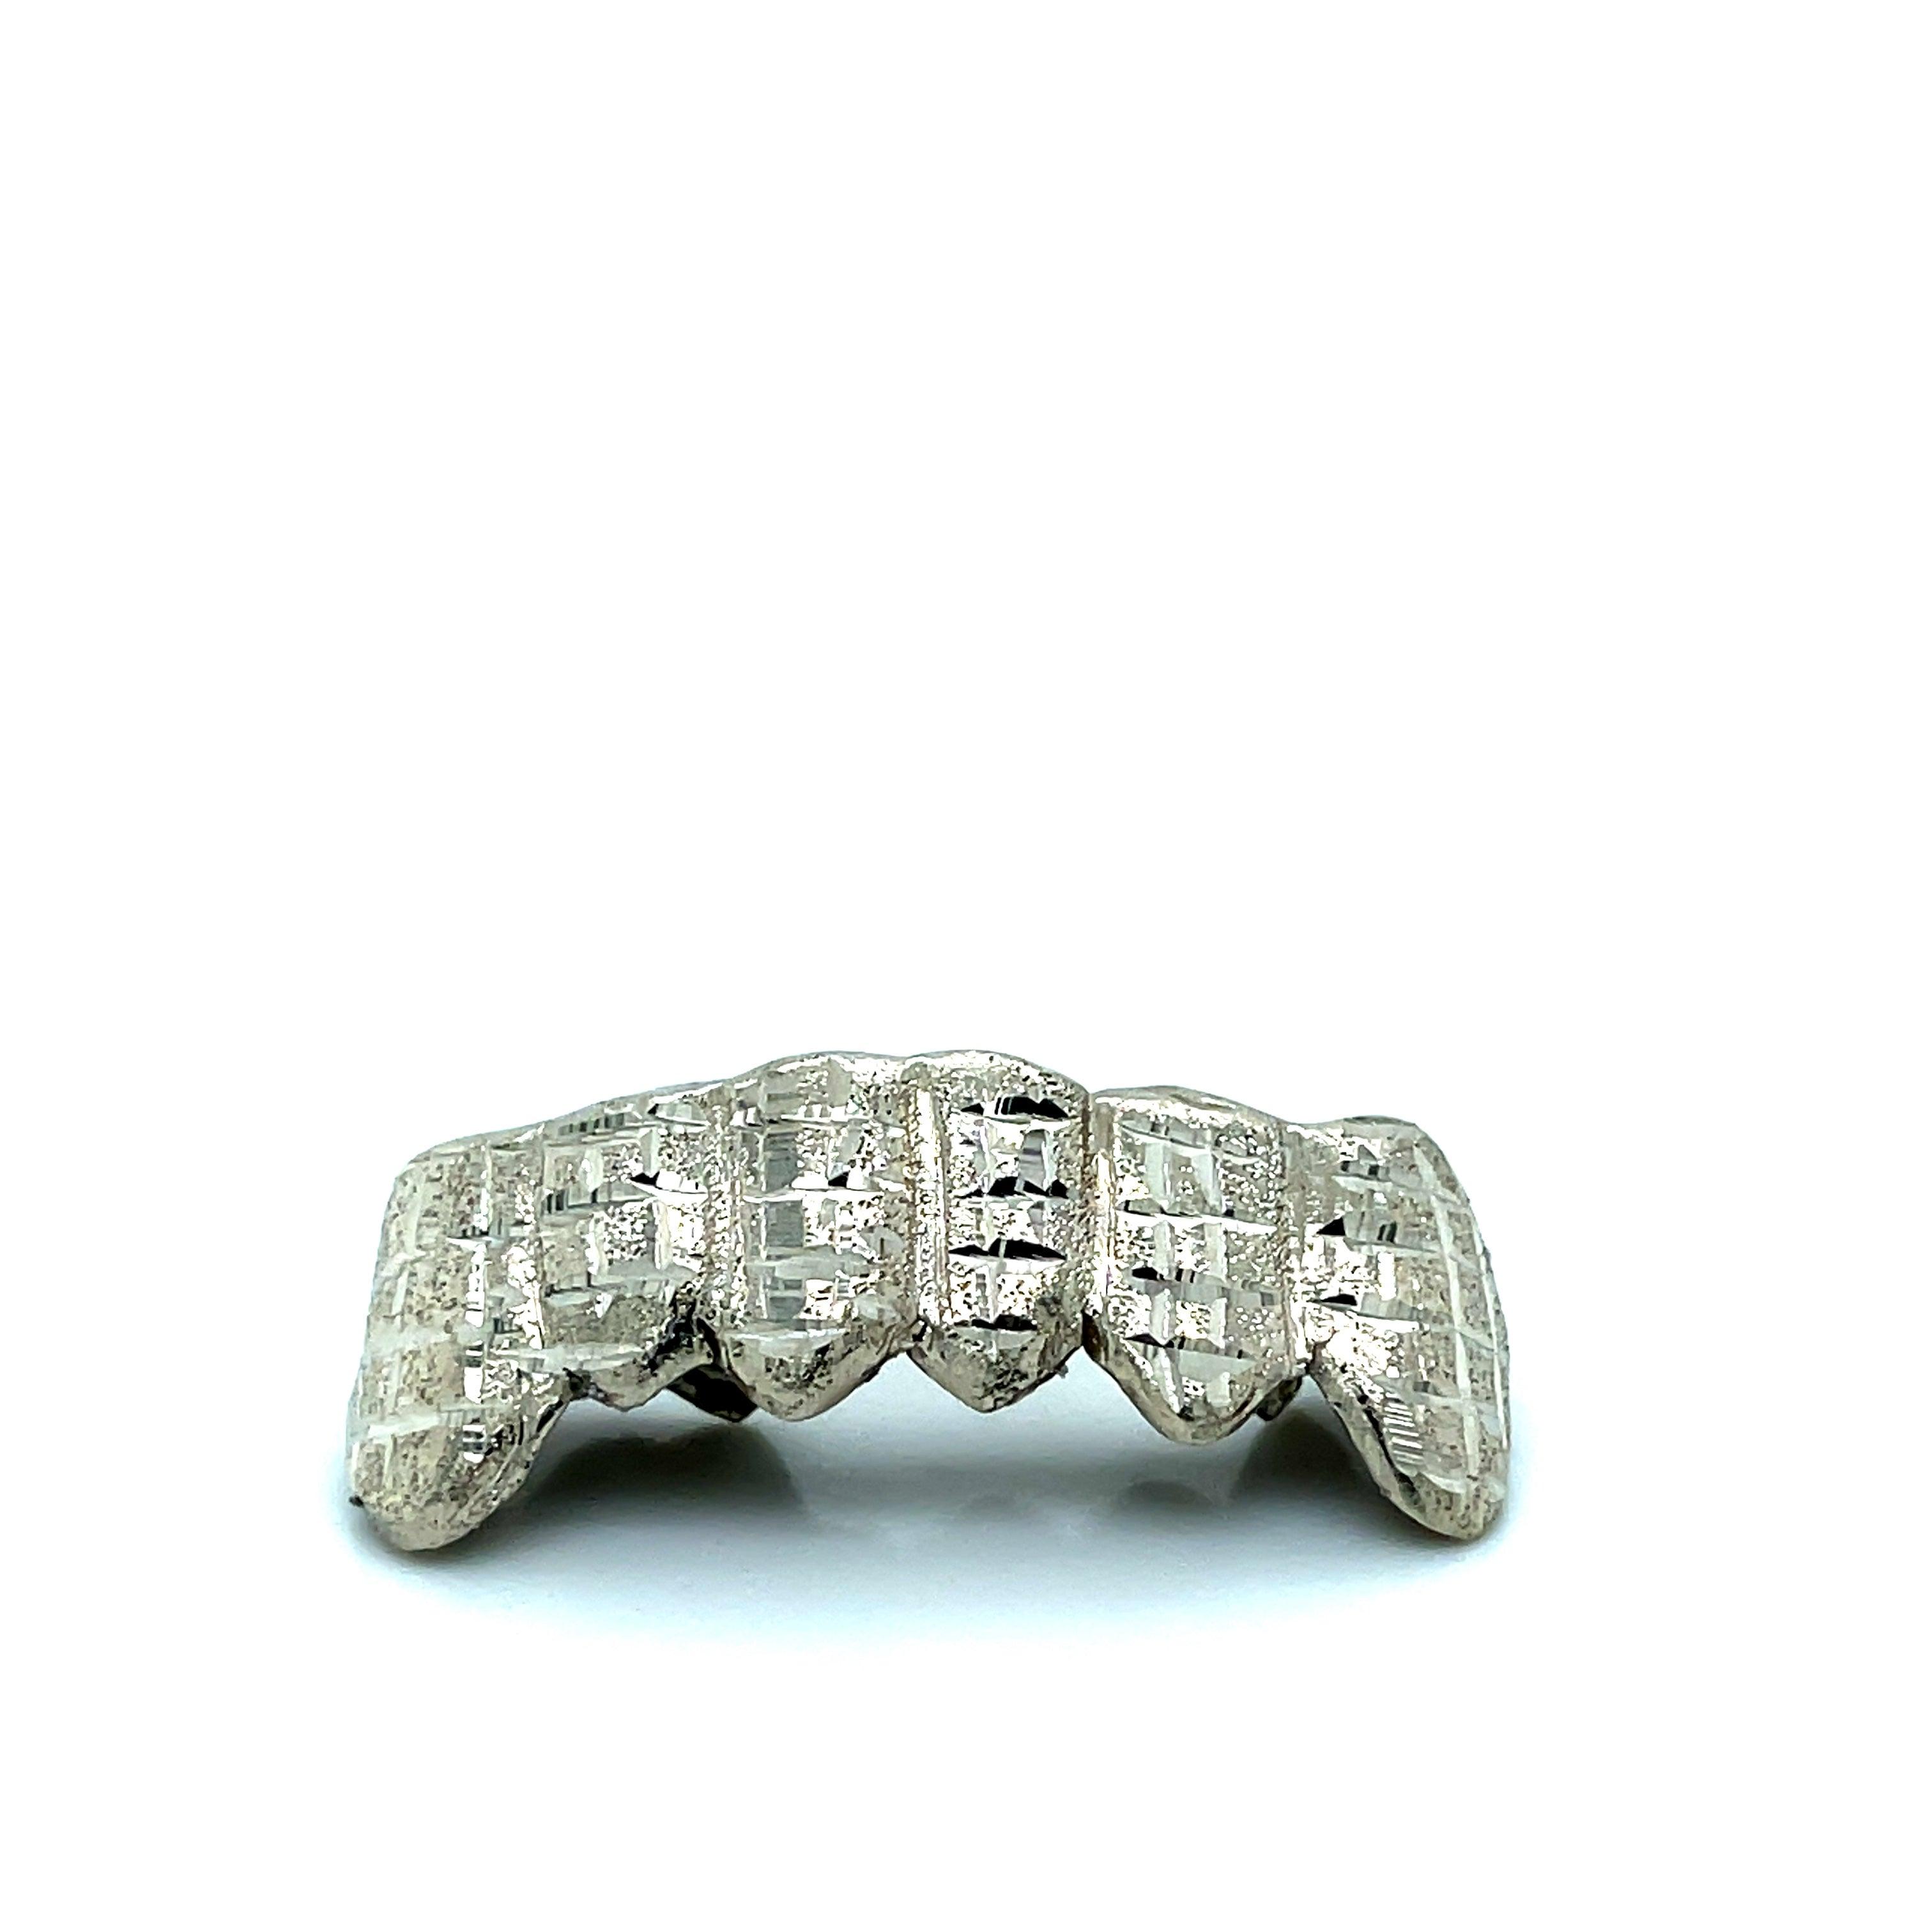 6pc White Gold Dusted Bricks Bottom Grillz - Seattle Gold Grillz